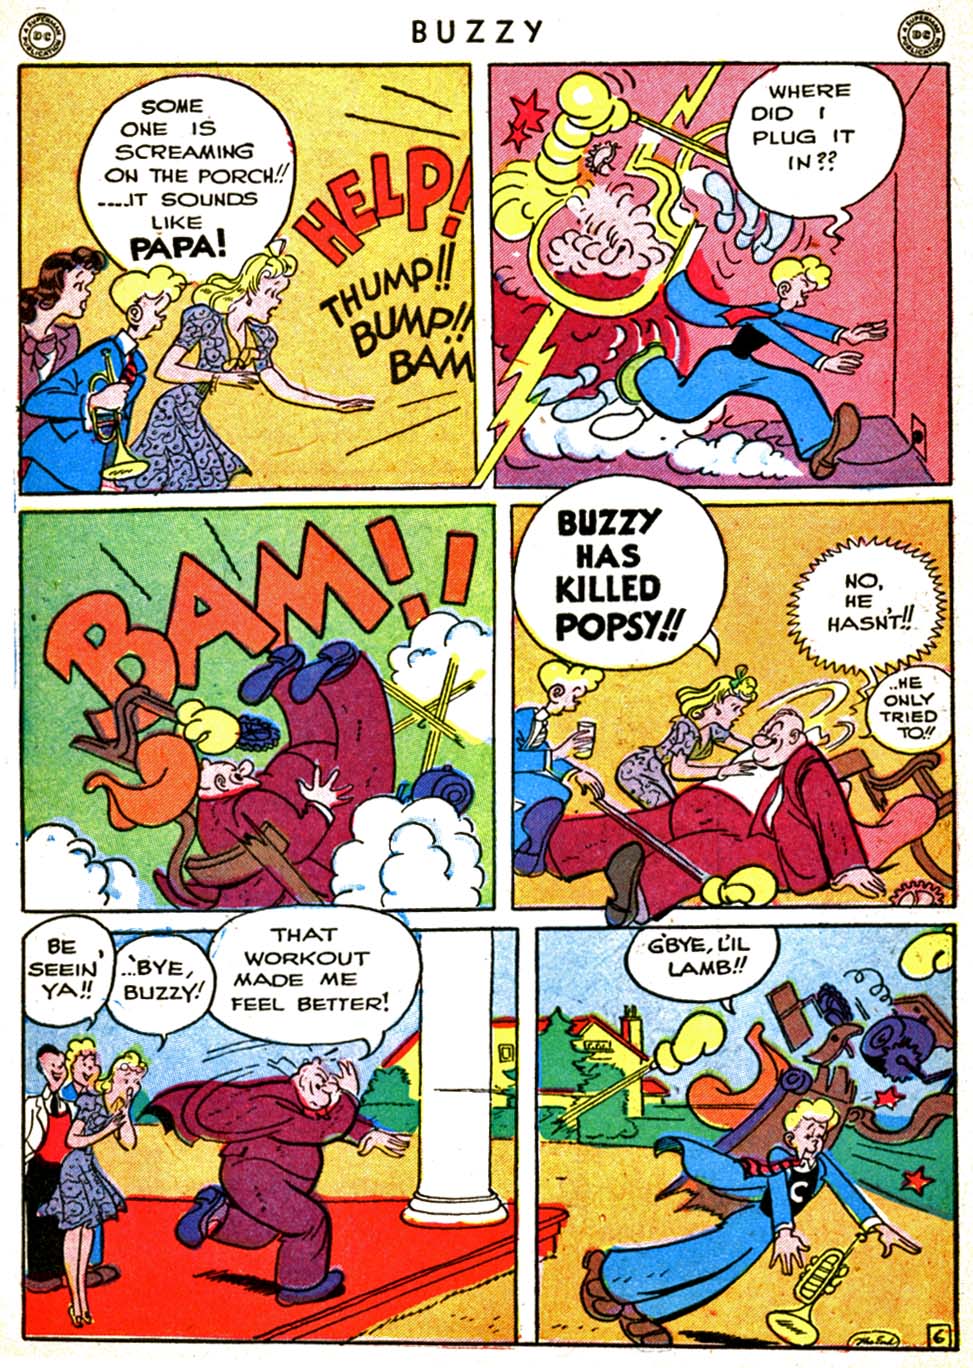 Read online Buzzy comic -  Issue #1 - 44